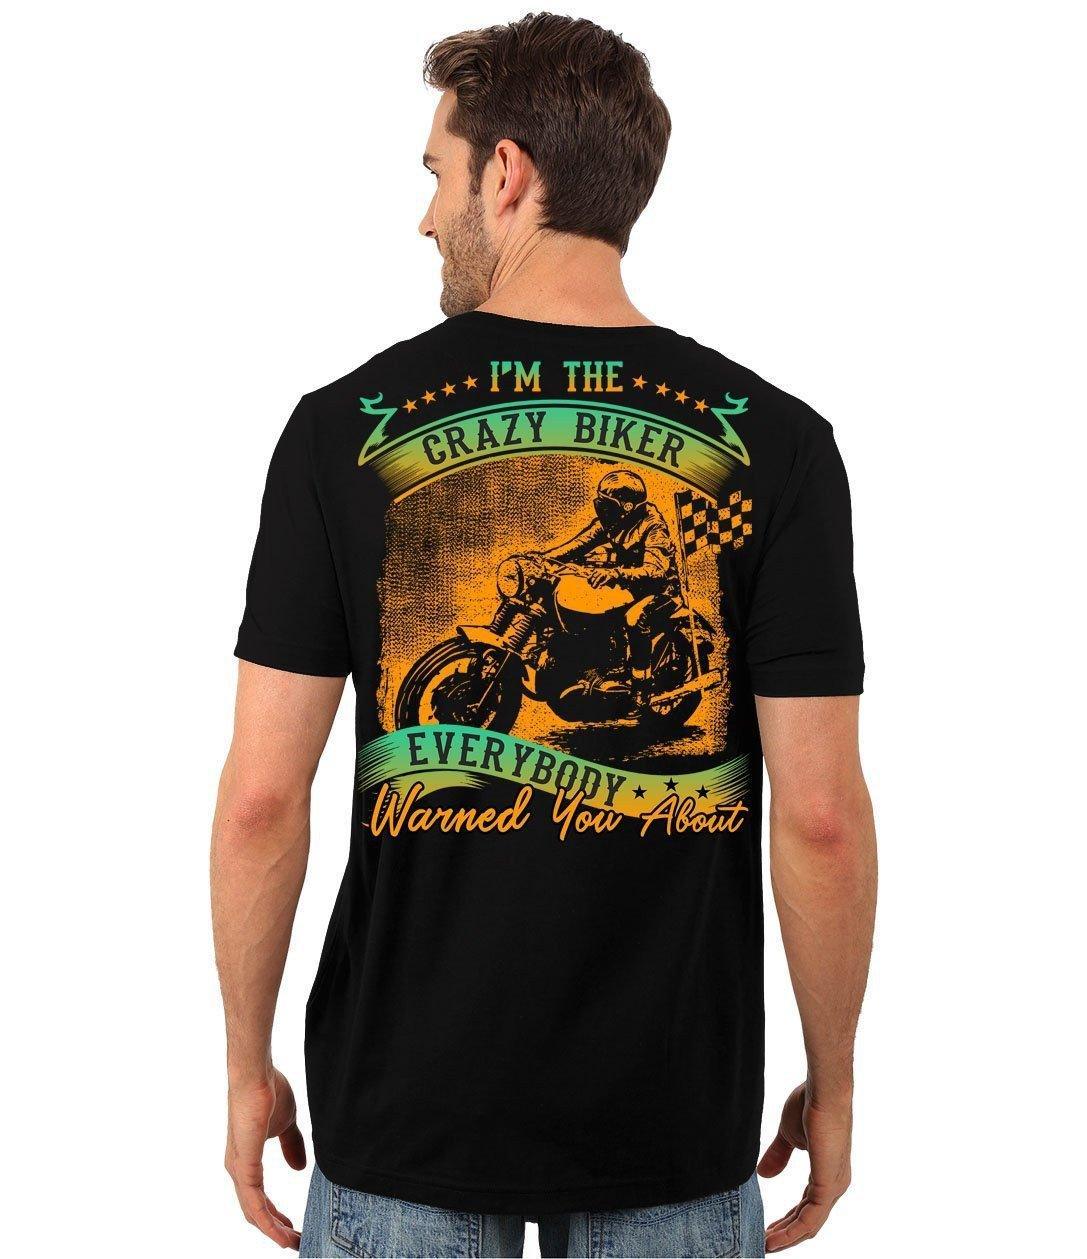 Everybody Warned You About T-Shirt - American Legend Rider